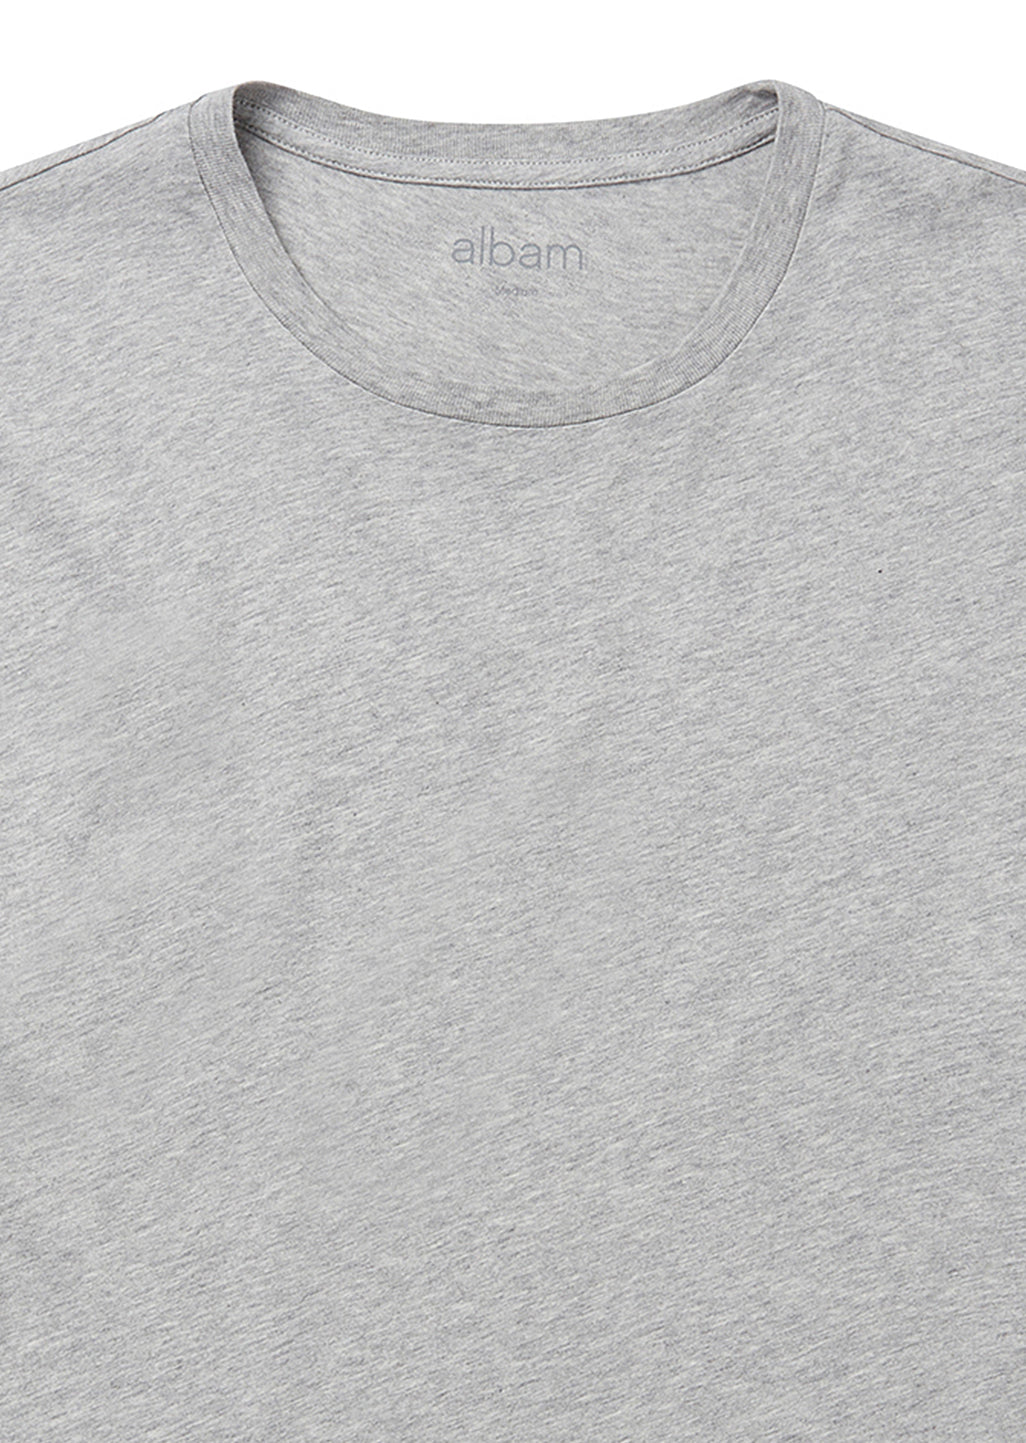 Classic T-Shirt in Grey Marl – albam Clothing